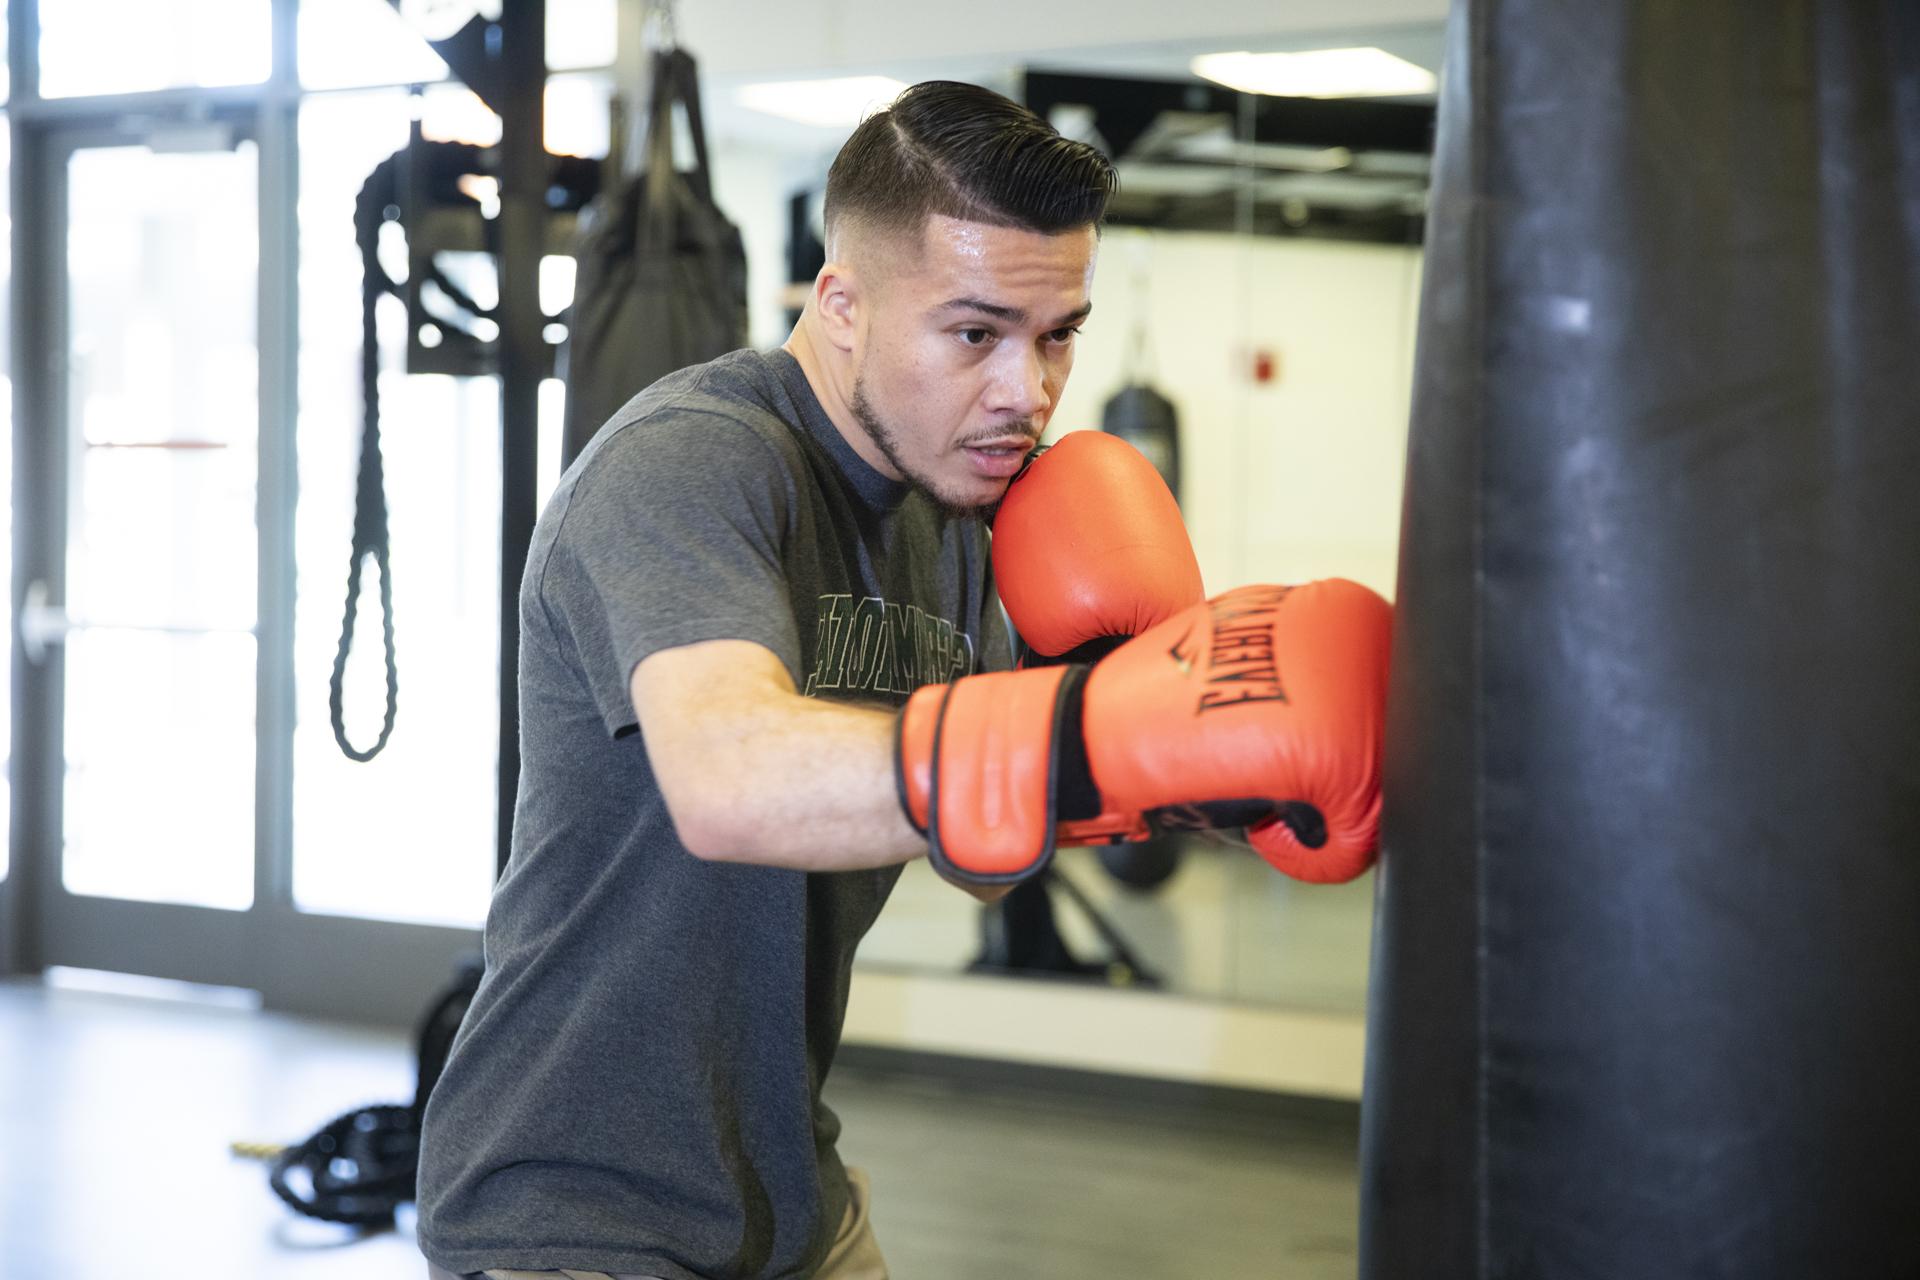 Sac State alumnus and boxer Kevin Montano works out with a punching bag.